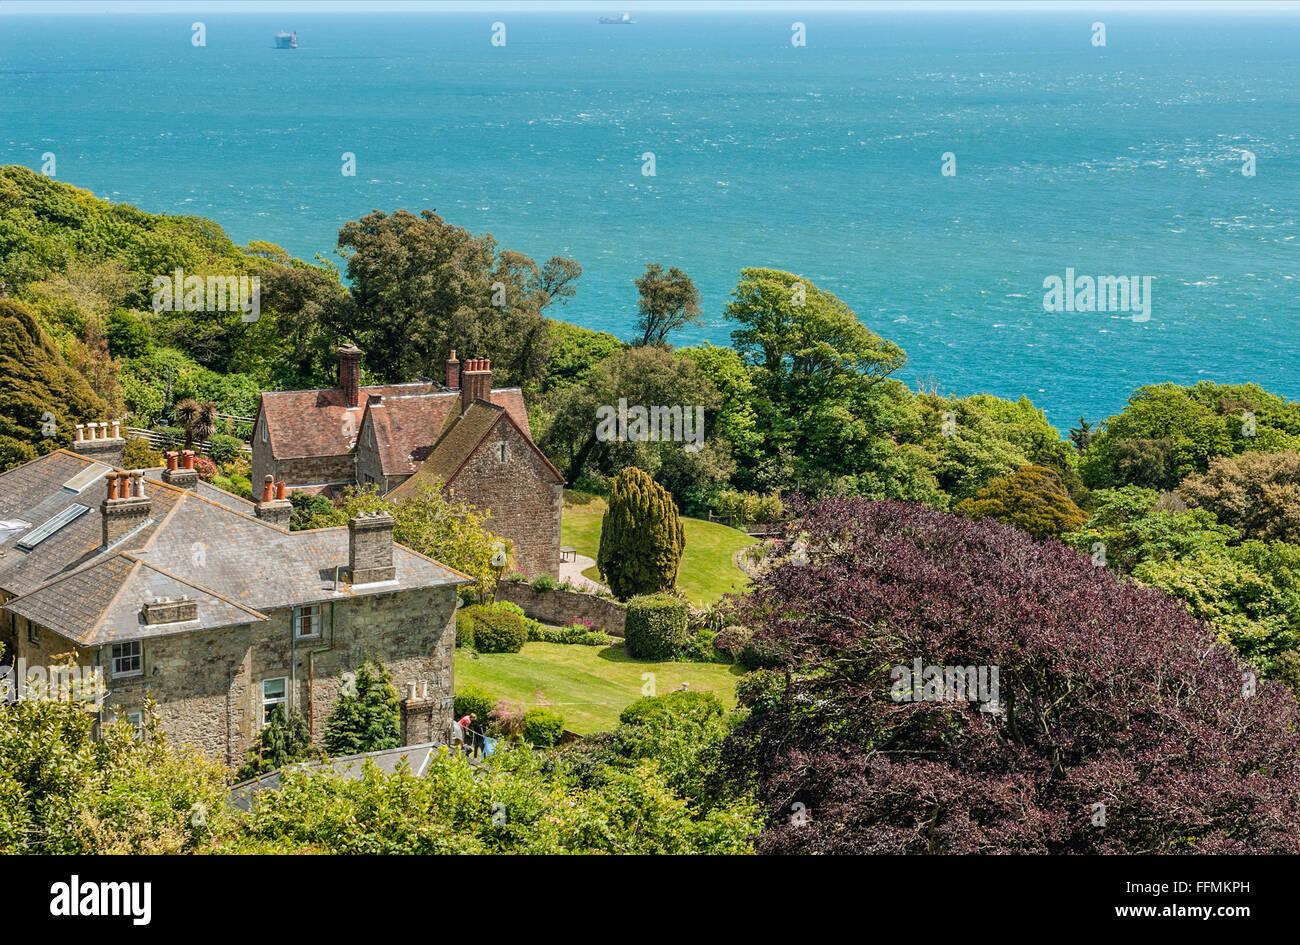 Southern coastline landscape at Isle of Wight, South England Stock Photo